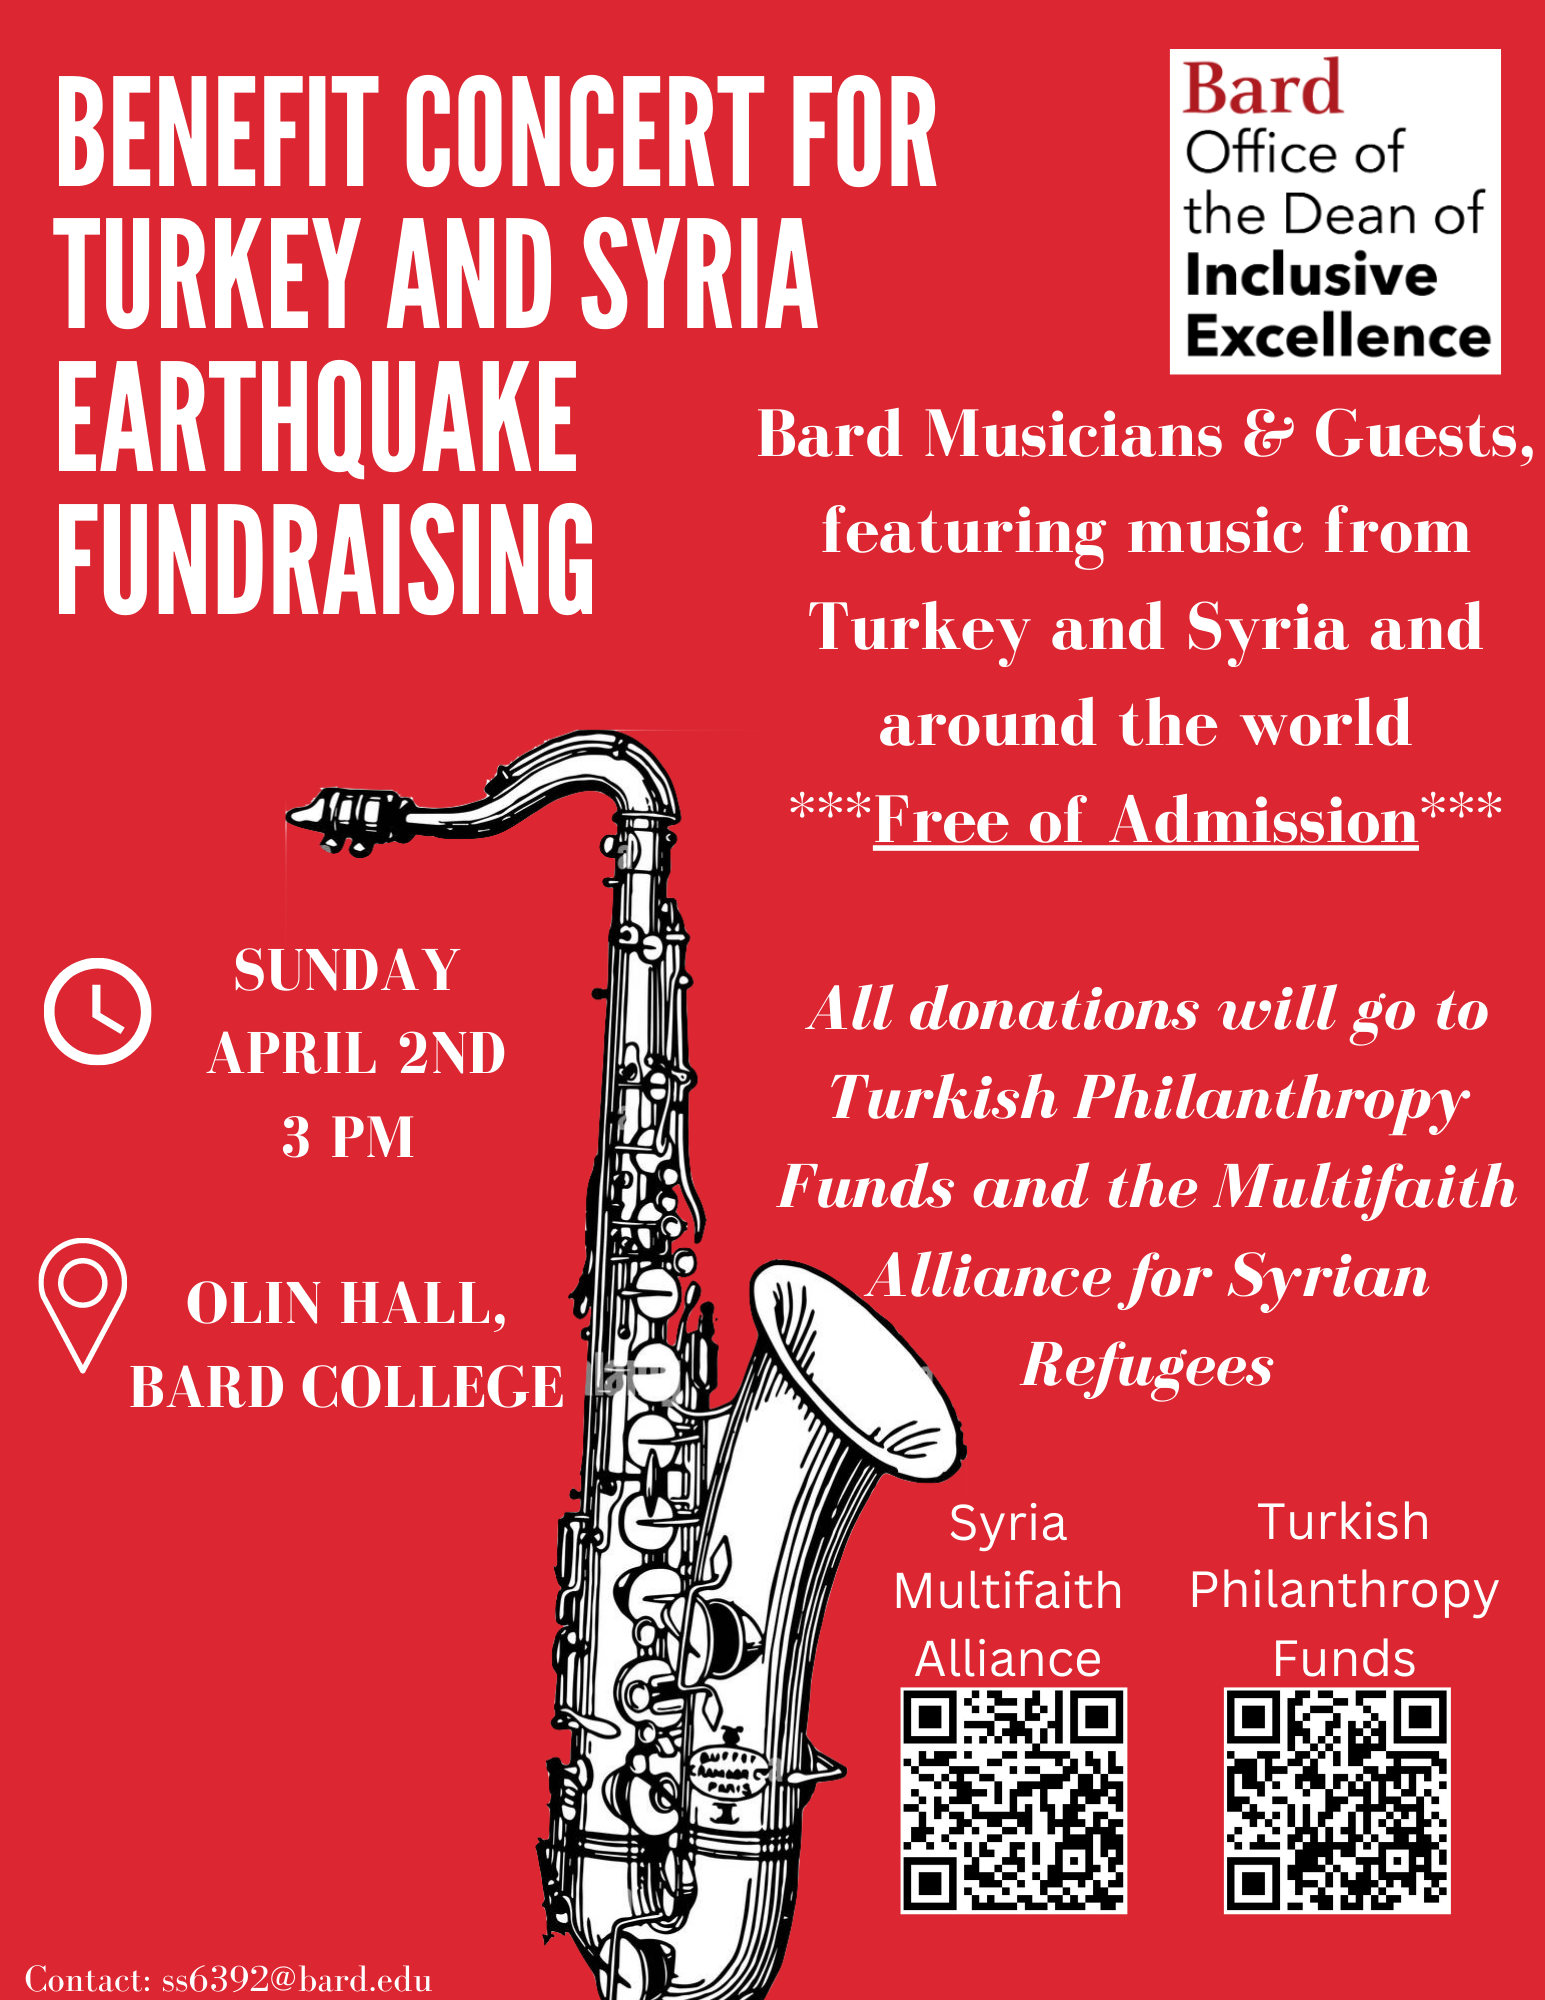 Benefit Concert for Turkey and Syria Earthquake Fundraising